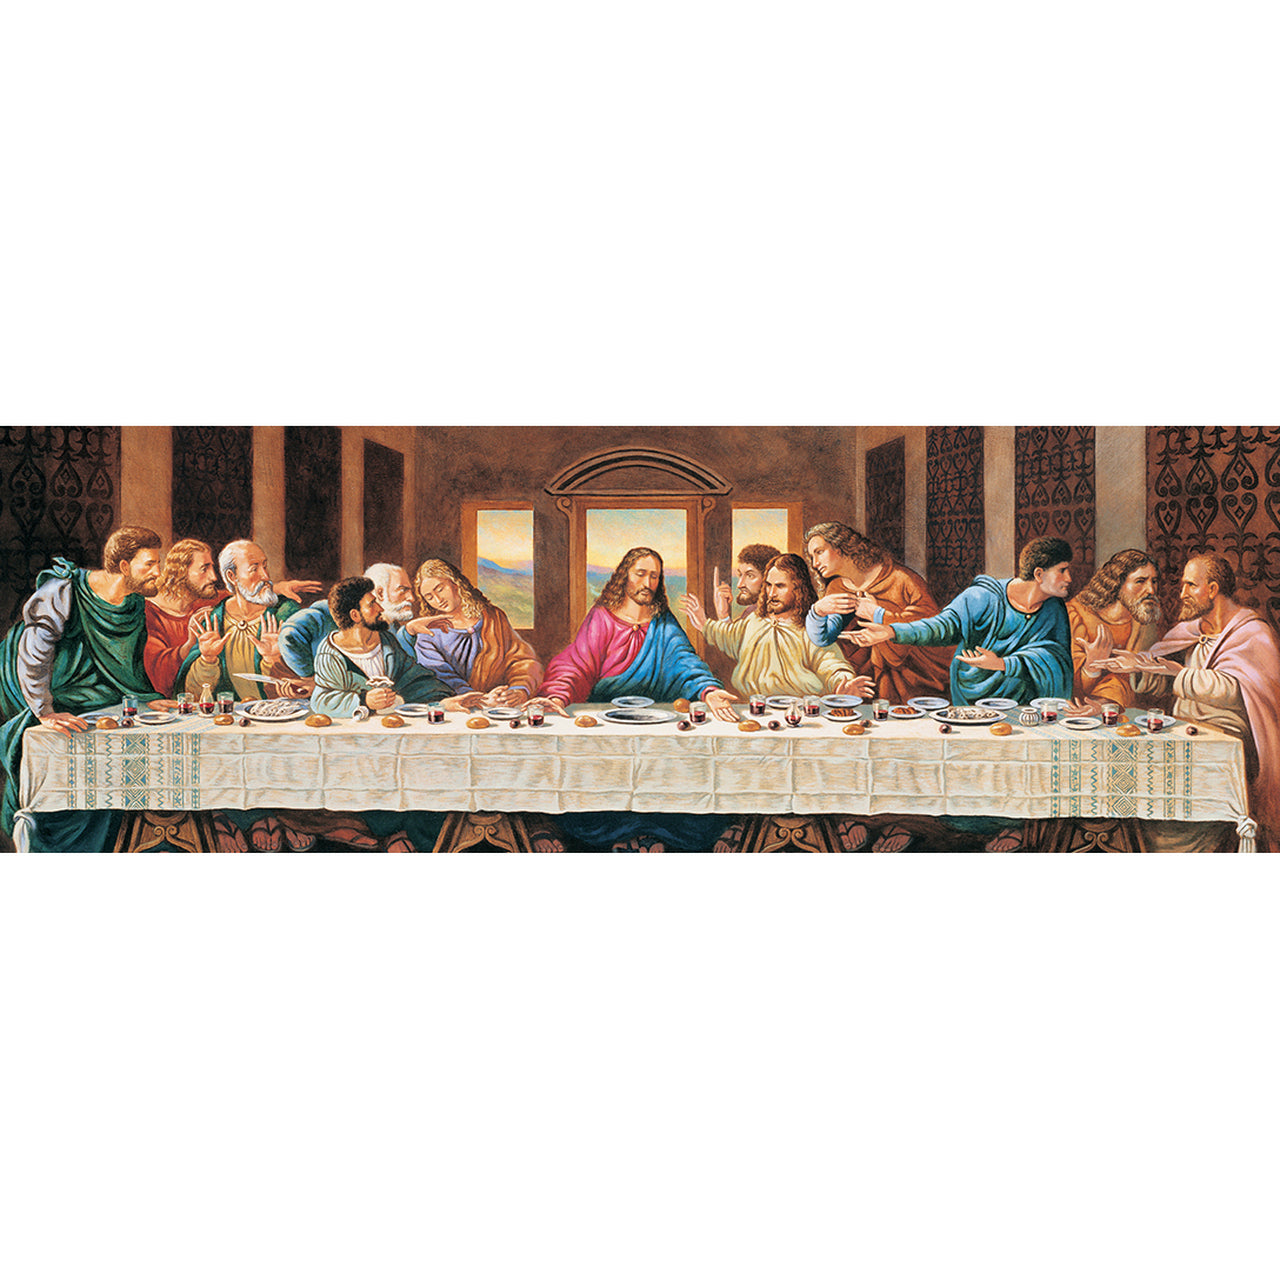 Inspirational The Last Supper 1000 Piece Panoramic Jigsaw Puzzle by Masterpieces